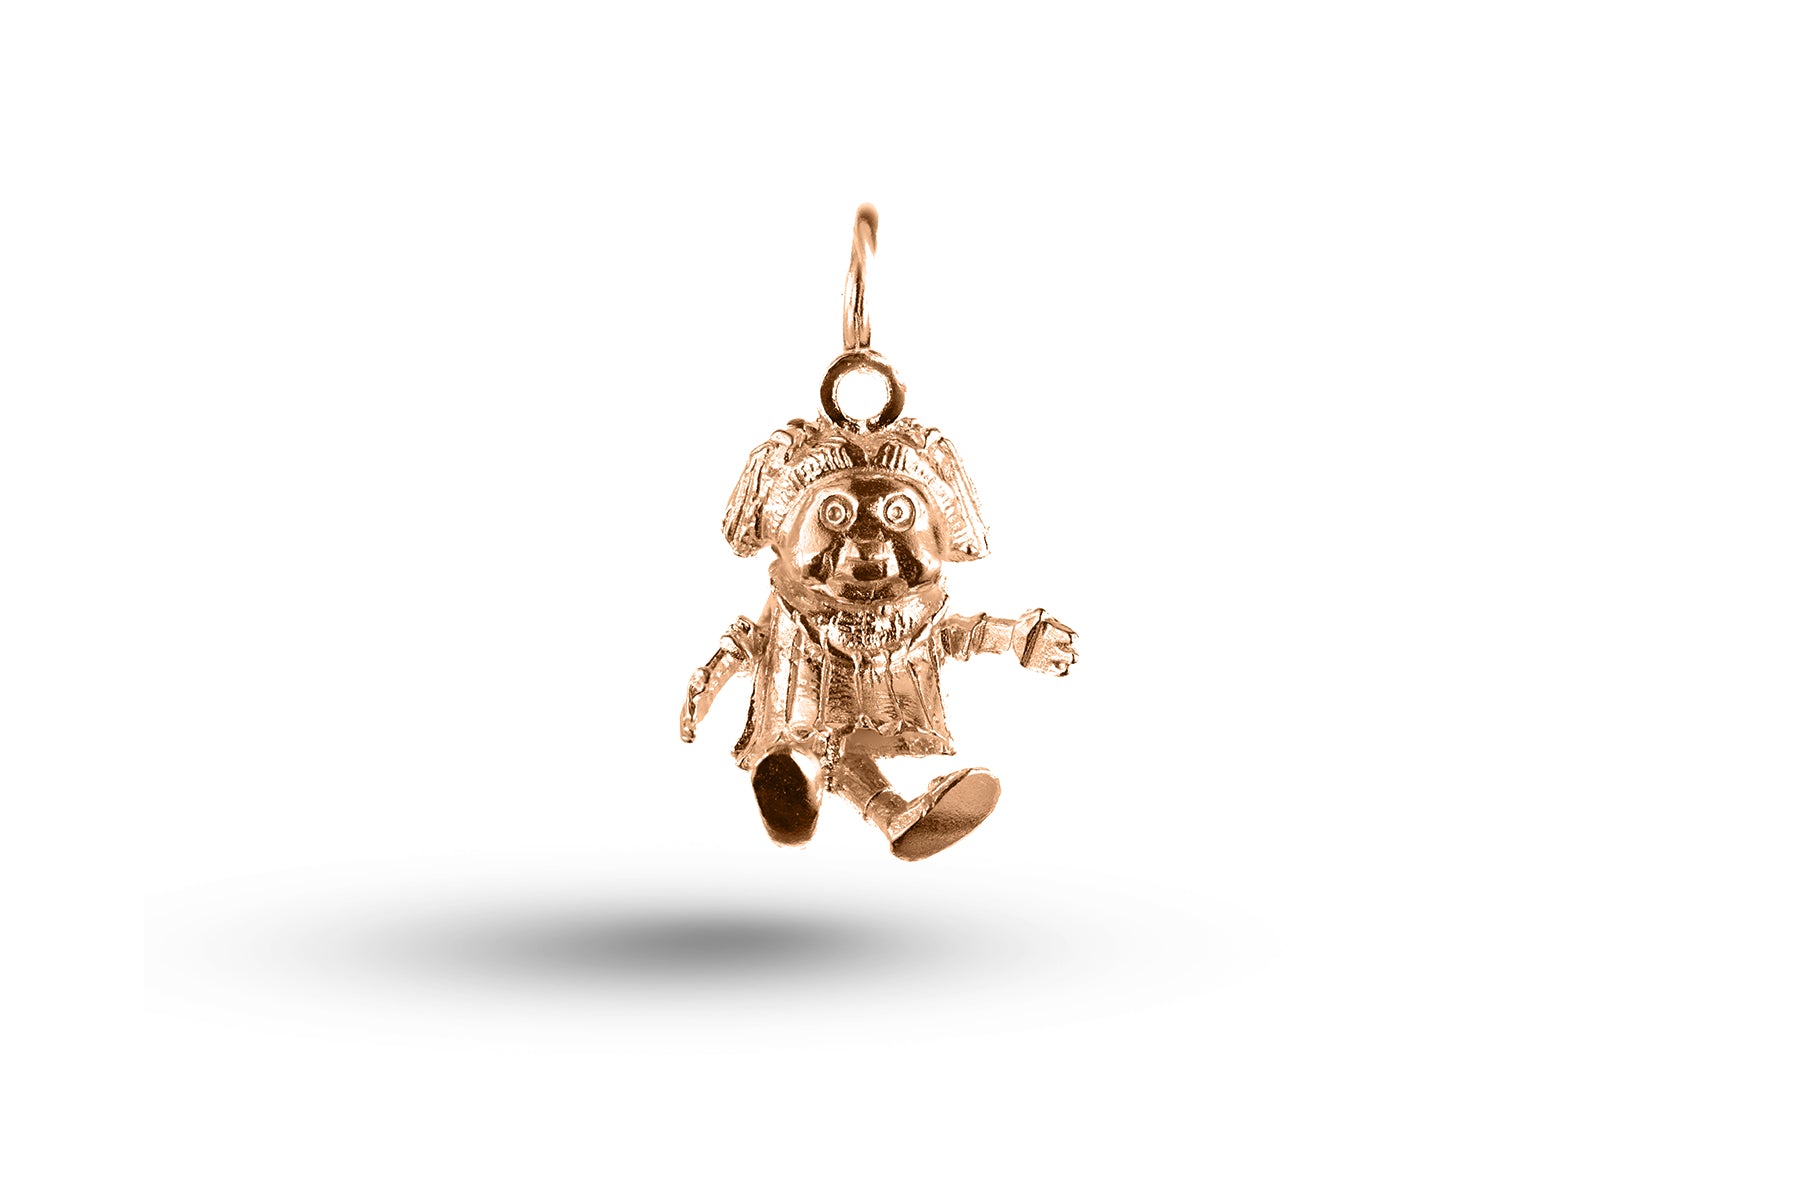 Luxury rose gold baby doll charm.